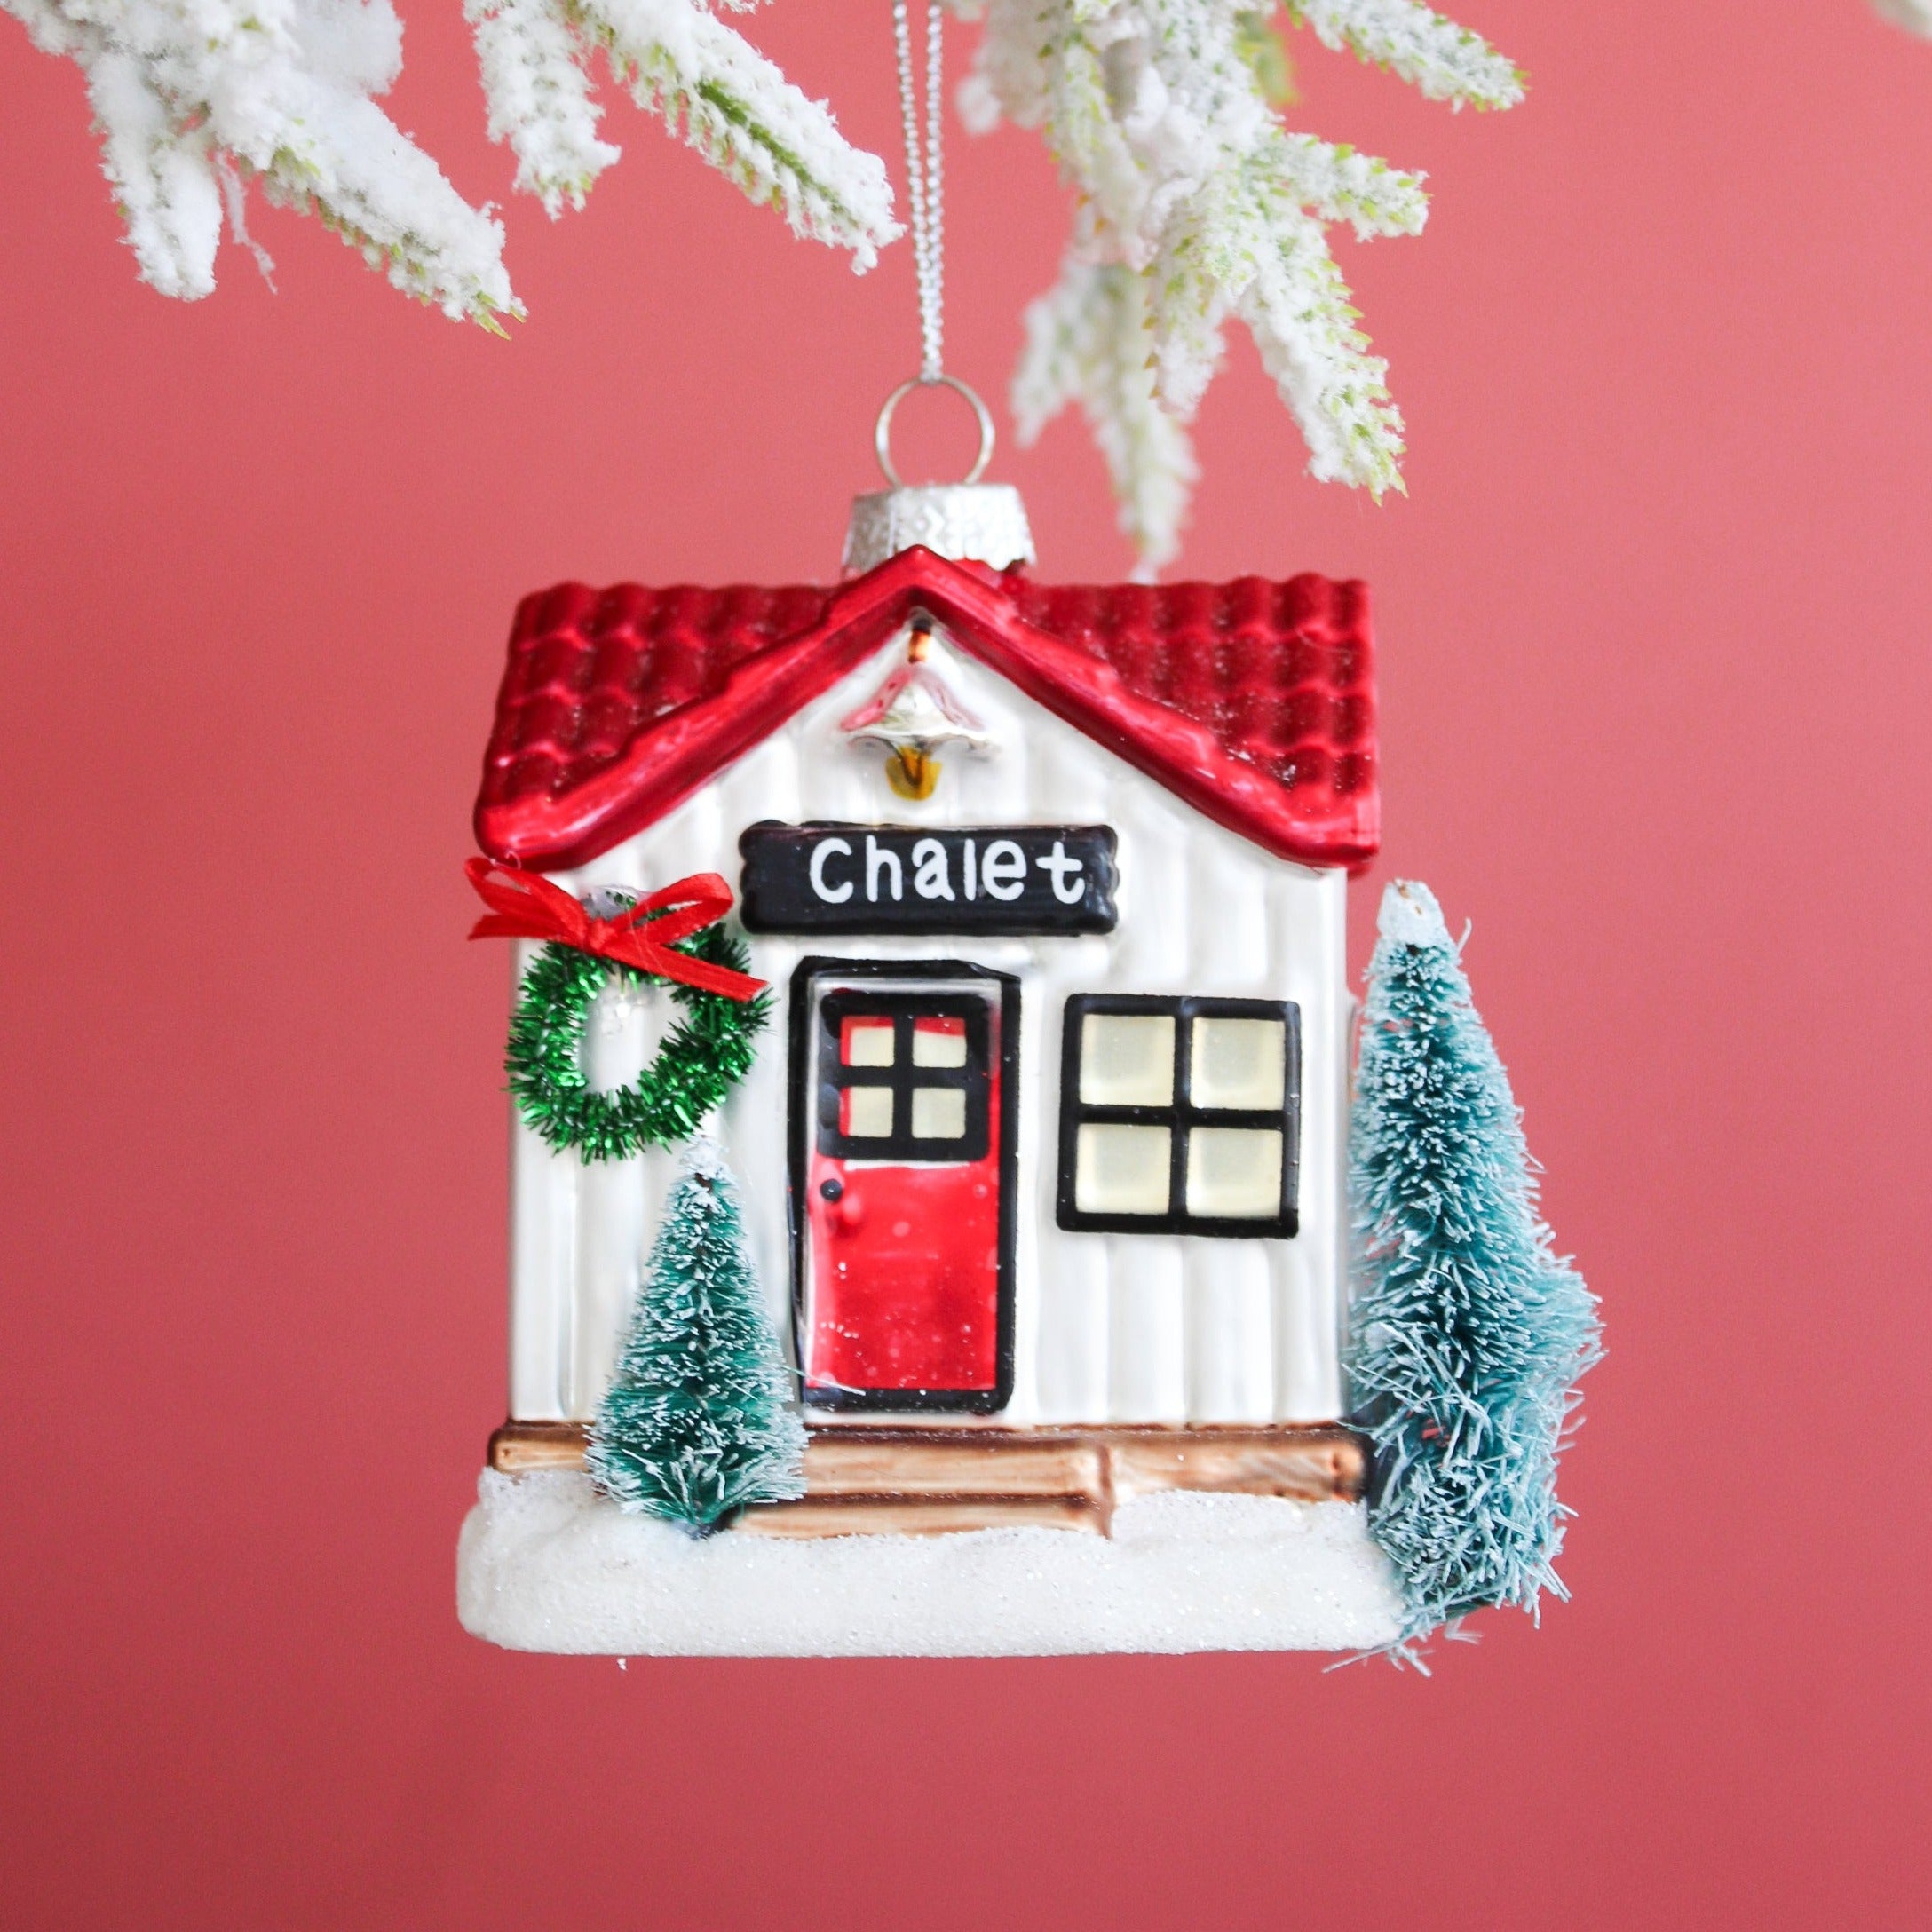 Chalet Cabin Ornament